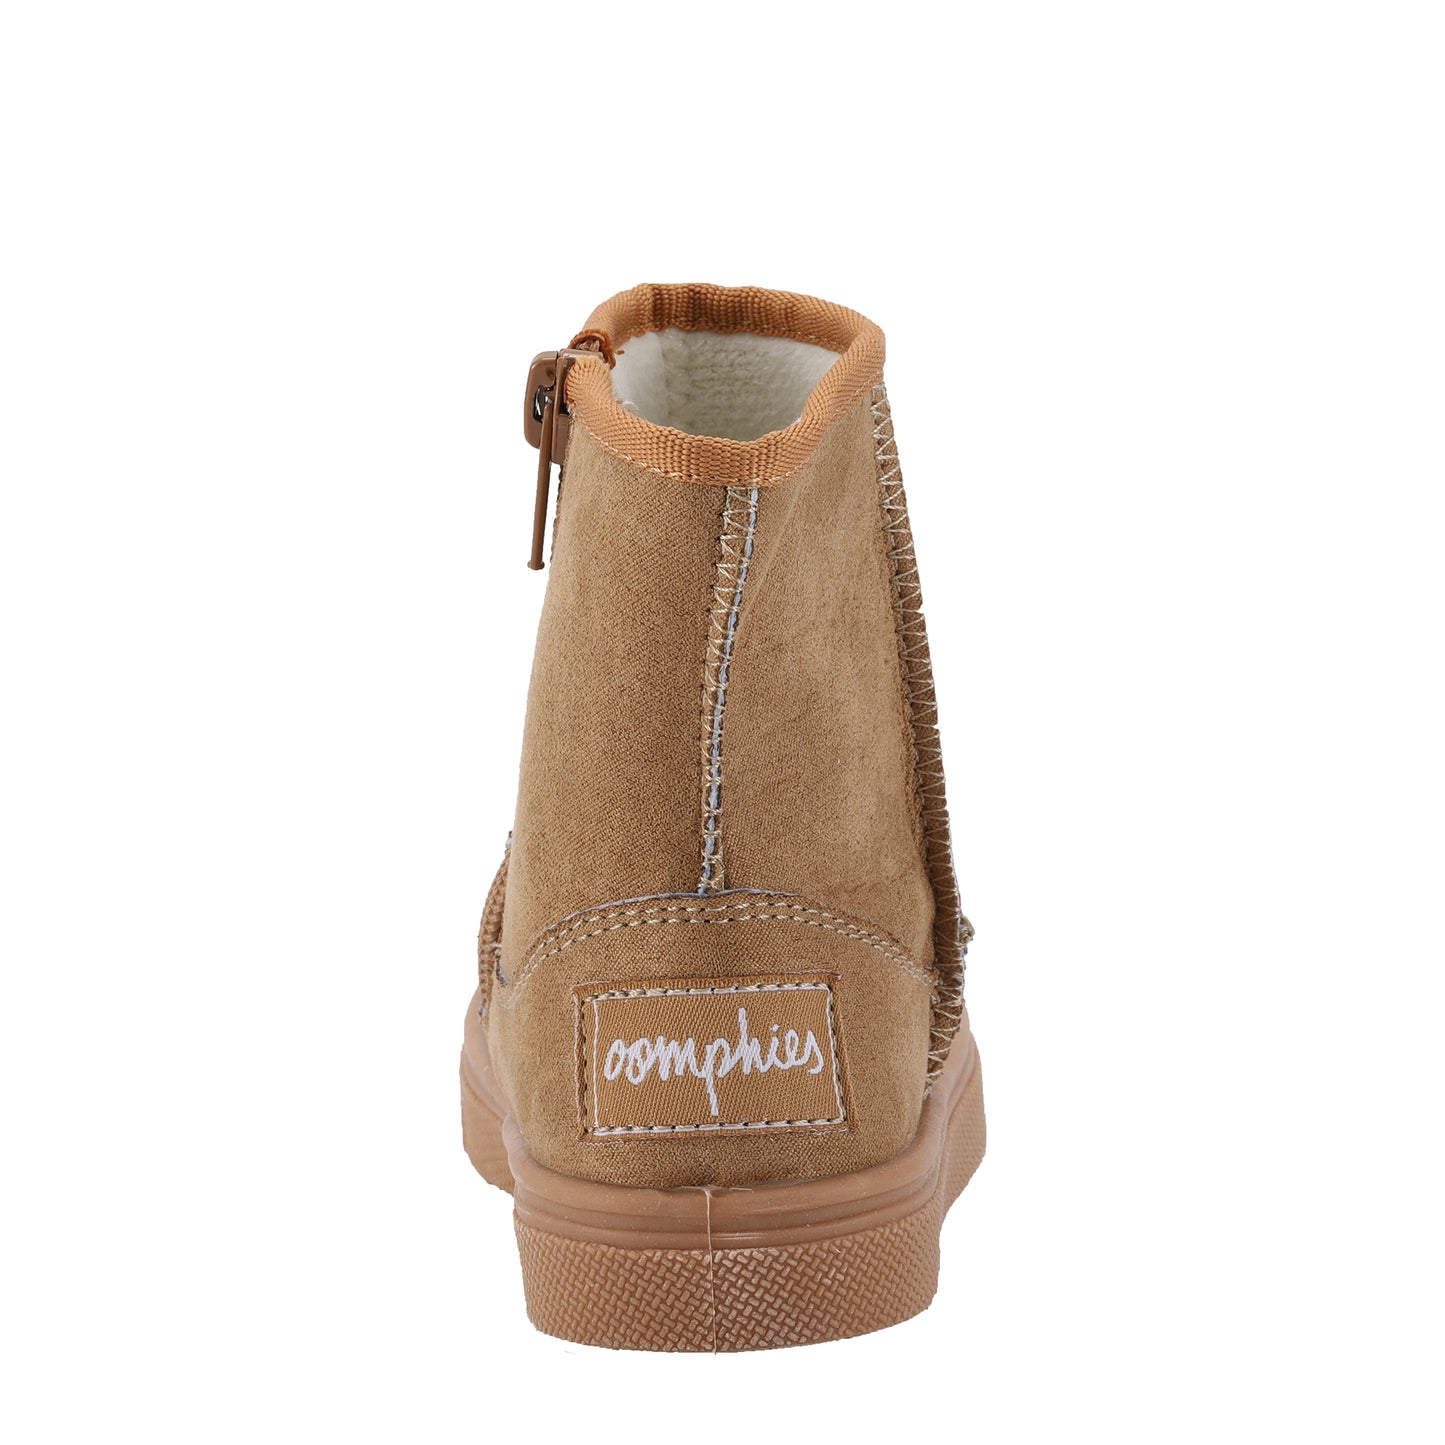 Oomphies Frost Boots - Chestnut